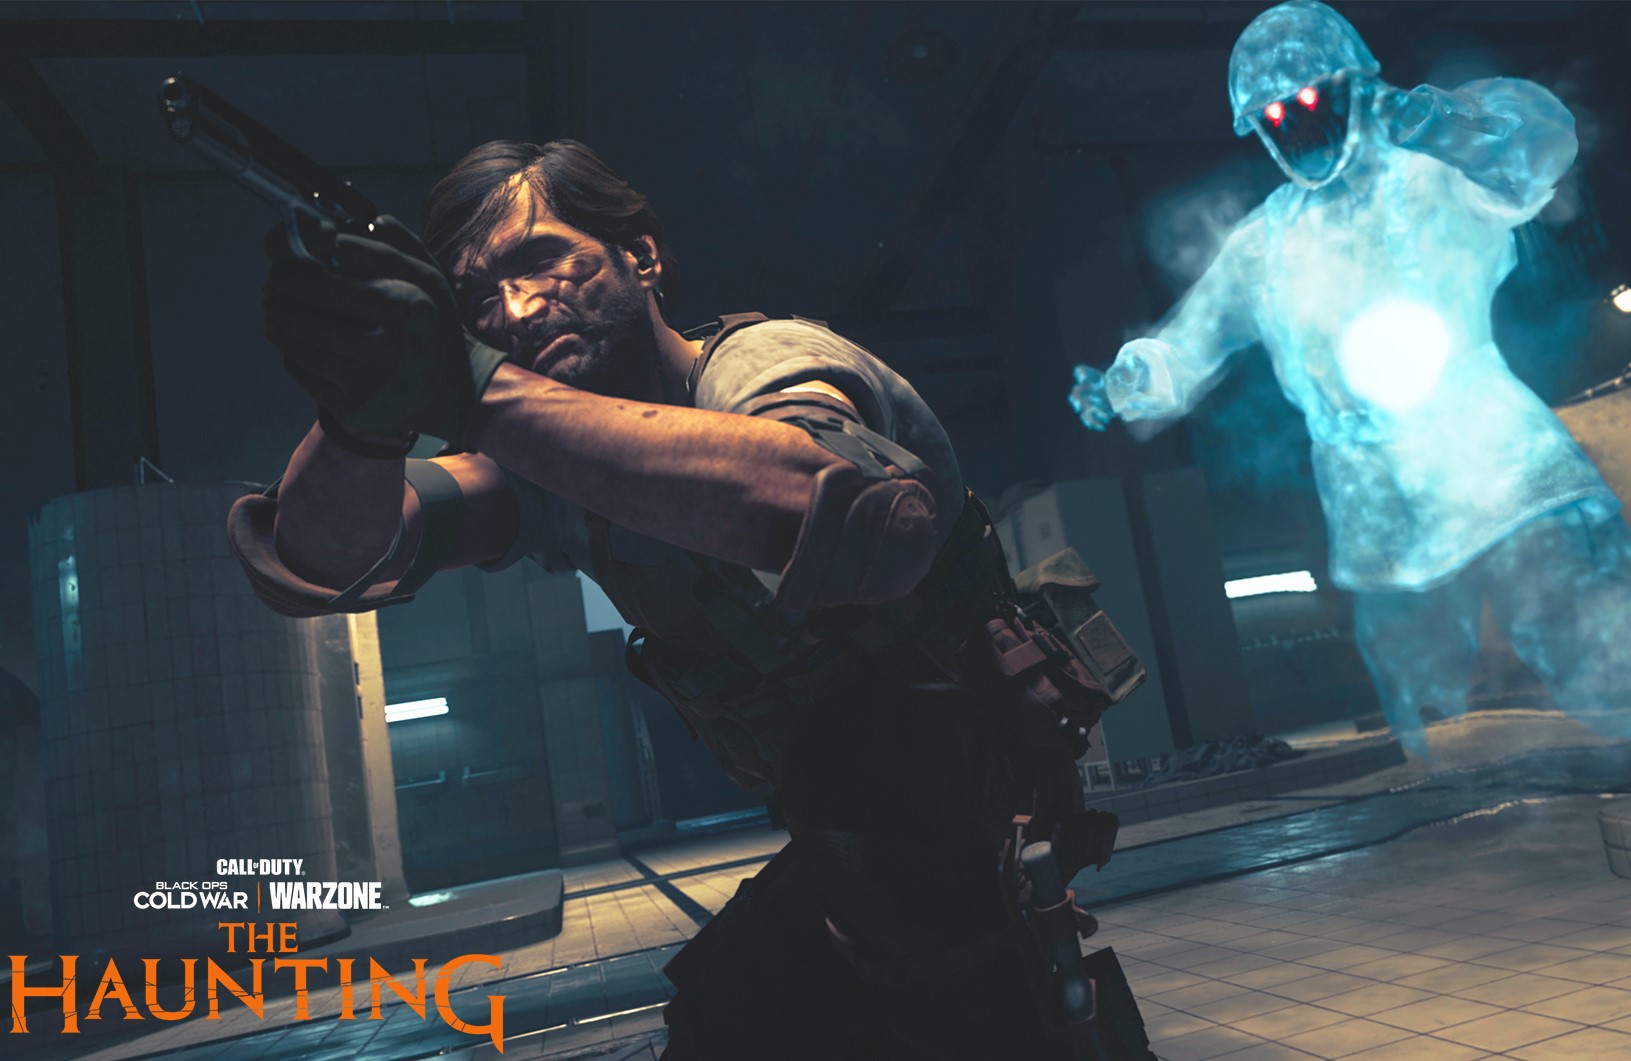 Call of Duty: Warzone – The Haunting